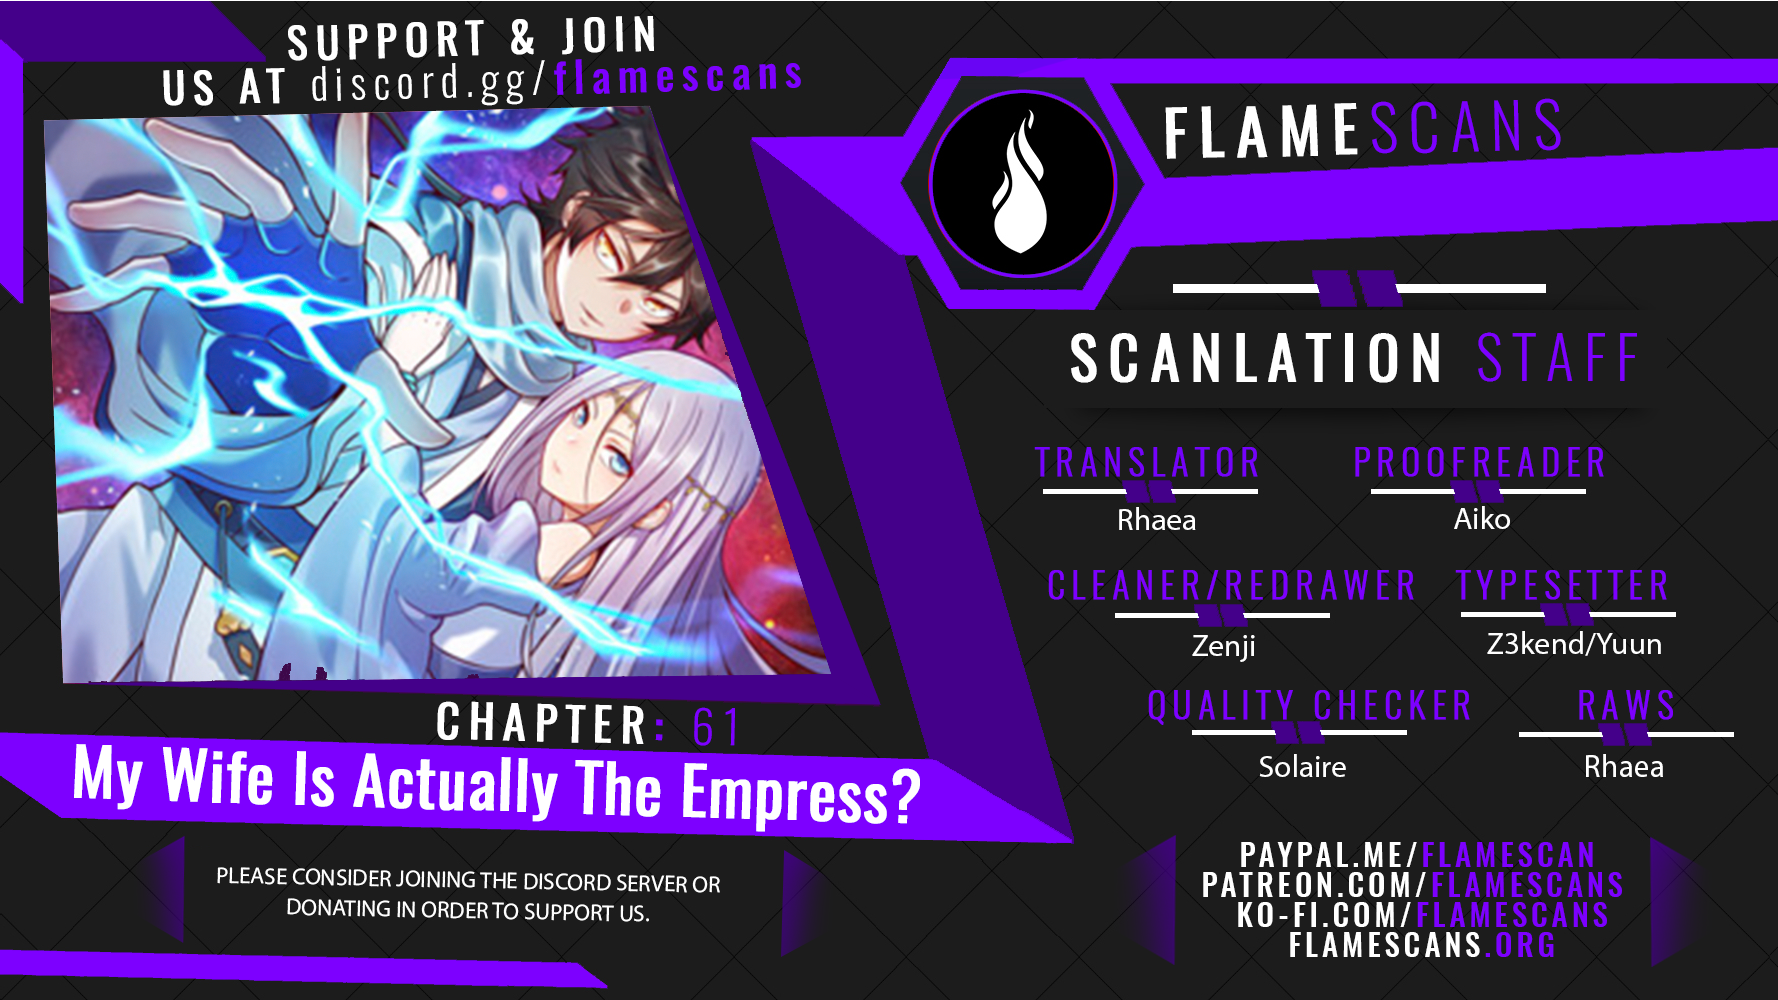 My Wife Is Actually The Empress? - Chapter 14171 - Image 1